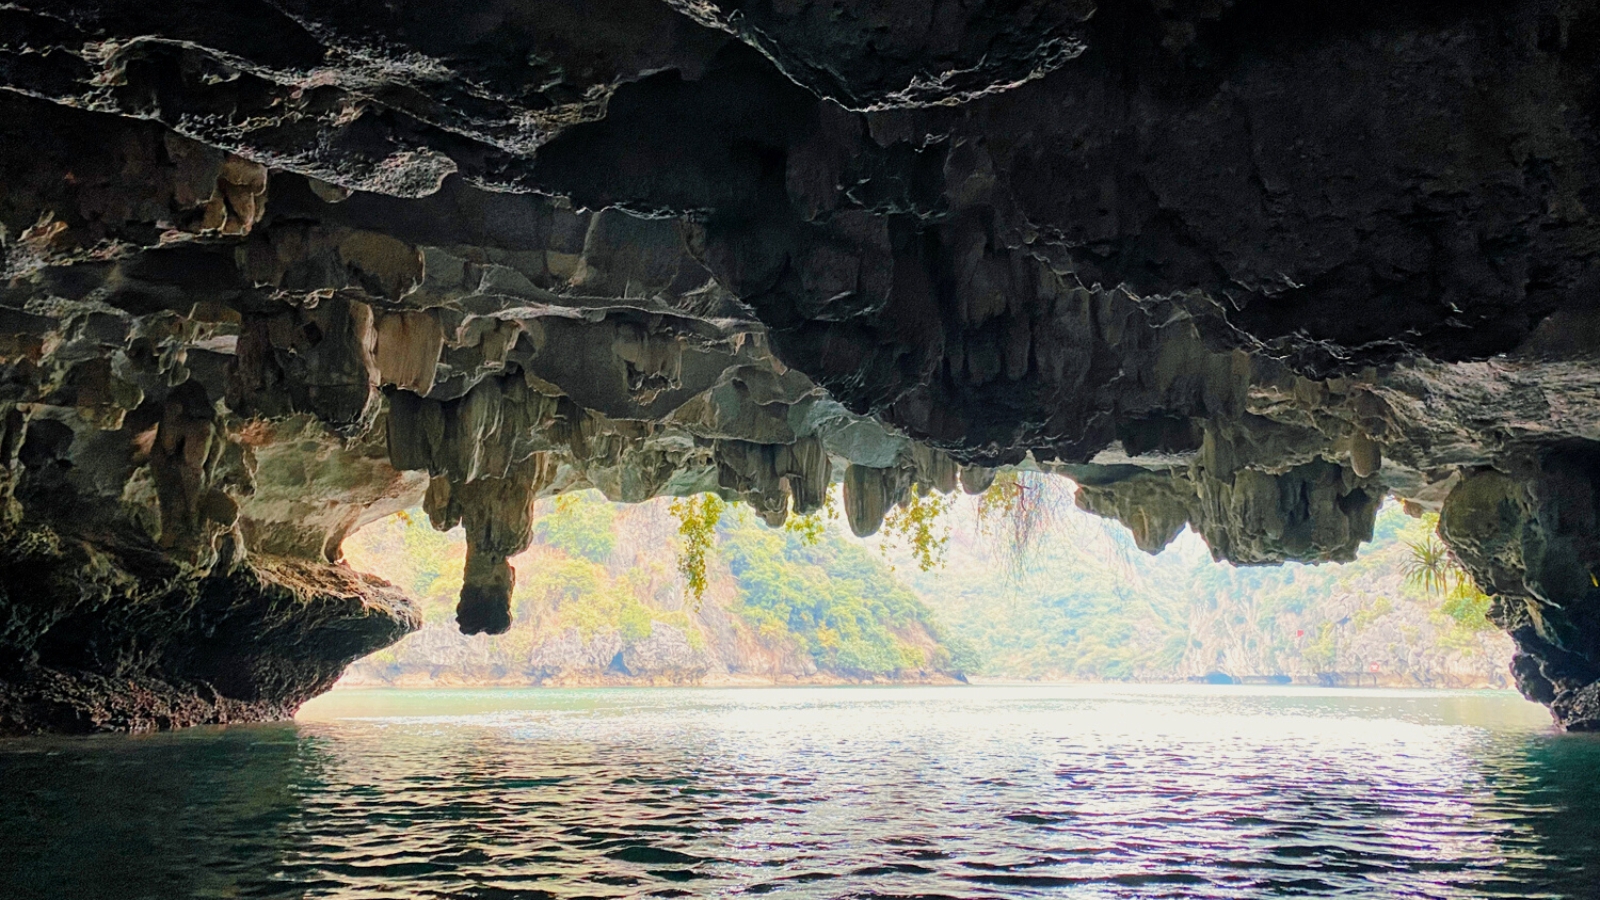 Outstanding view inside the cave